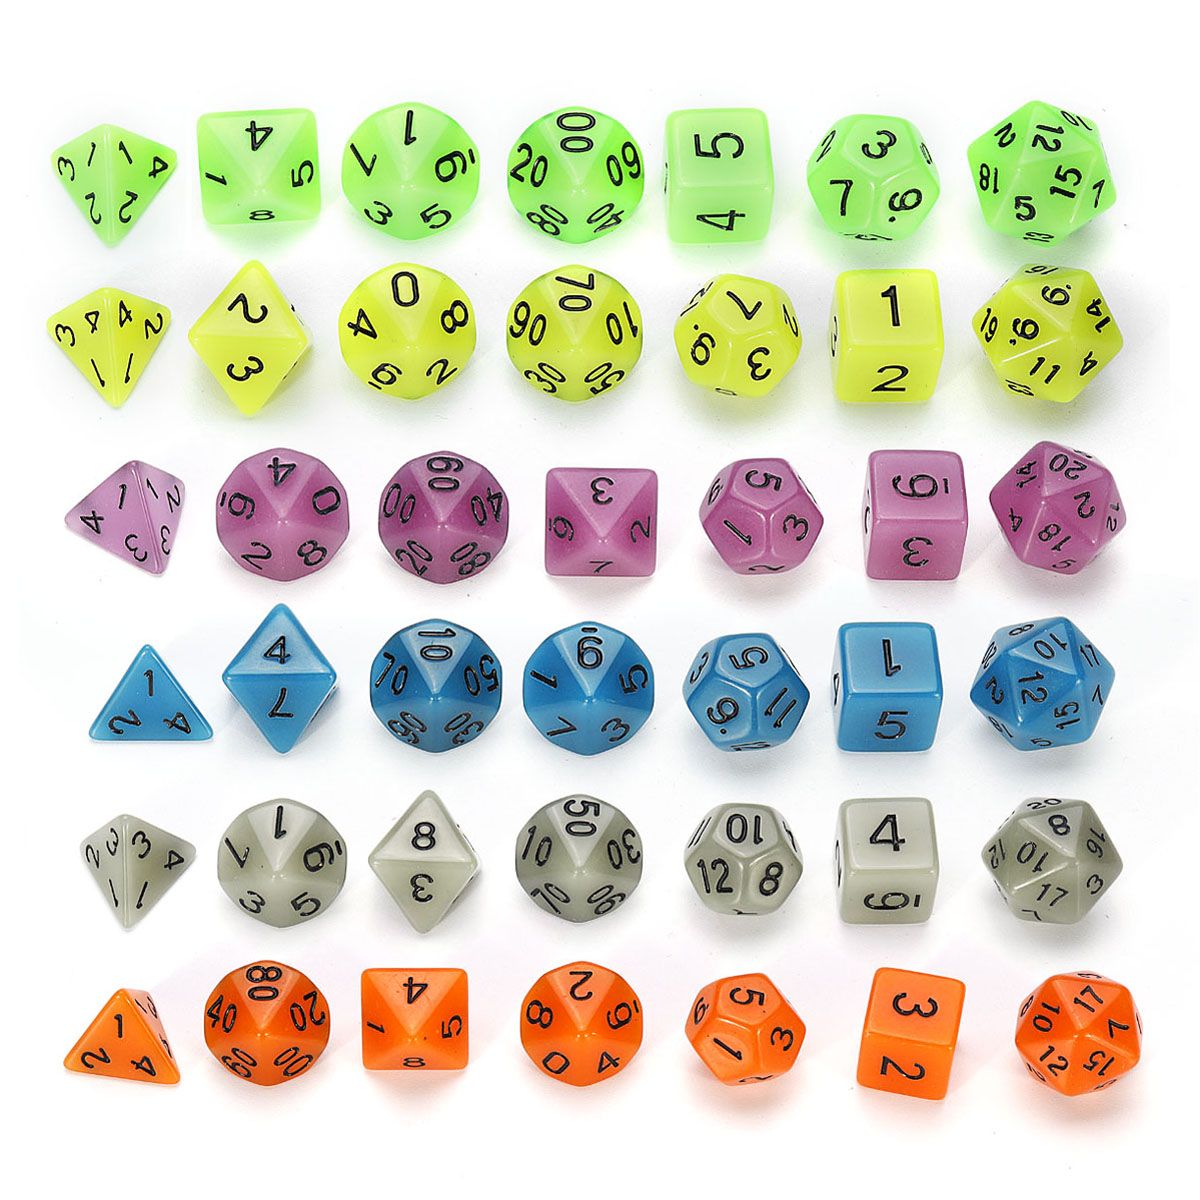 7-Pcs-Luminous-Polyhedral-Dices-Multi-sided-Dice-Set-Polyhedral-Dices-With-Dice-Cup-RPG-Gadget-1422236